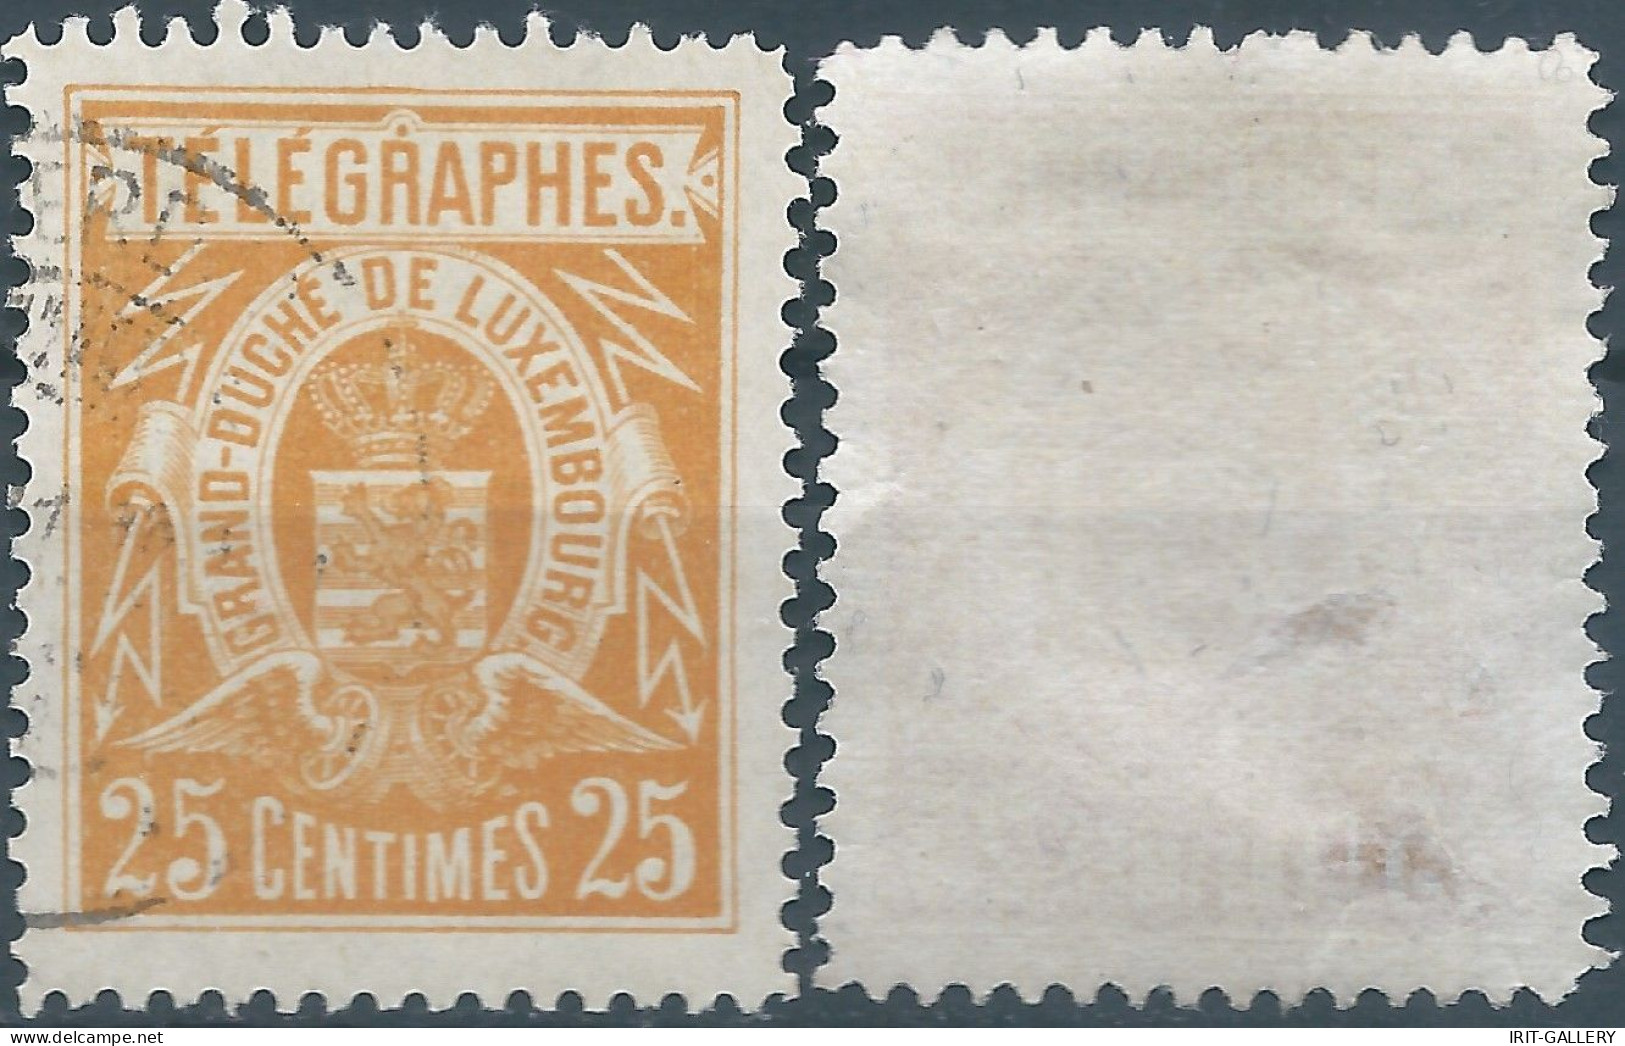 Lussemburgo - Luxembourg -TELEGRAPHES 1883 Telegraph Stamps,25C,Used & Not Cancelled, Mint - Telegraph